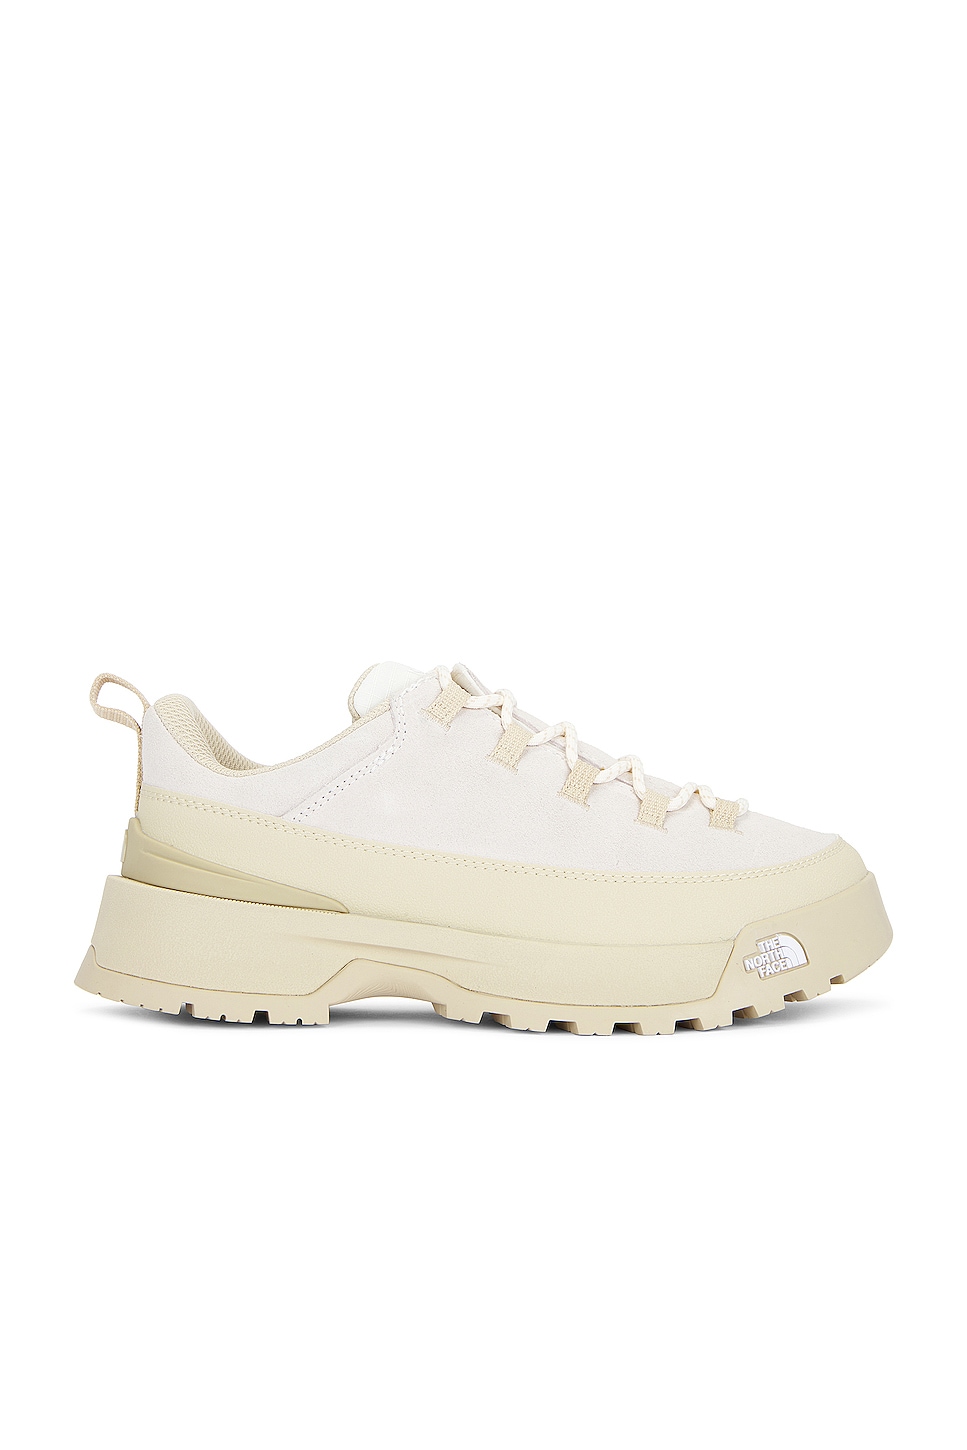 Image 1 of The North Face Glenclyffe Urban Low Sneaker in White Dune & Gravel